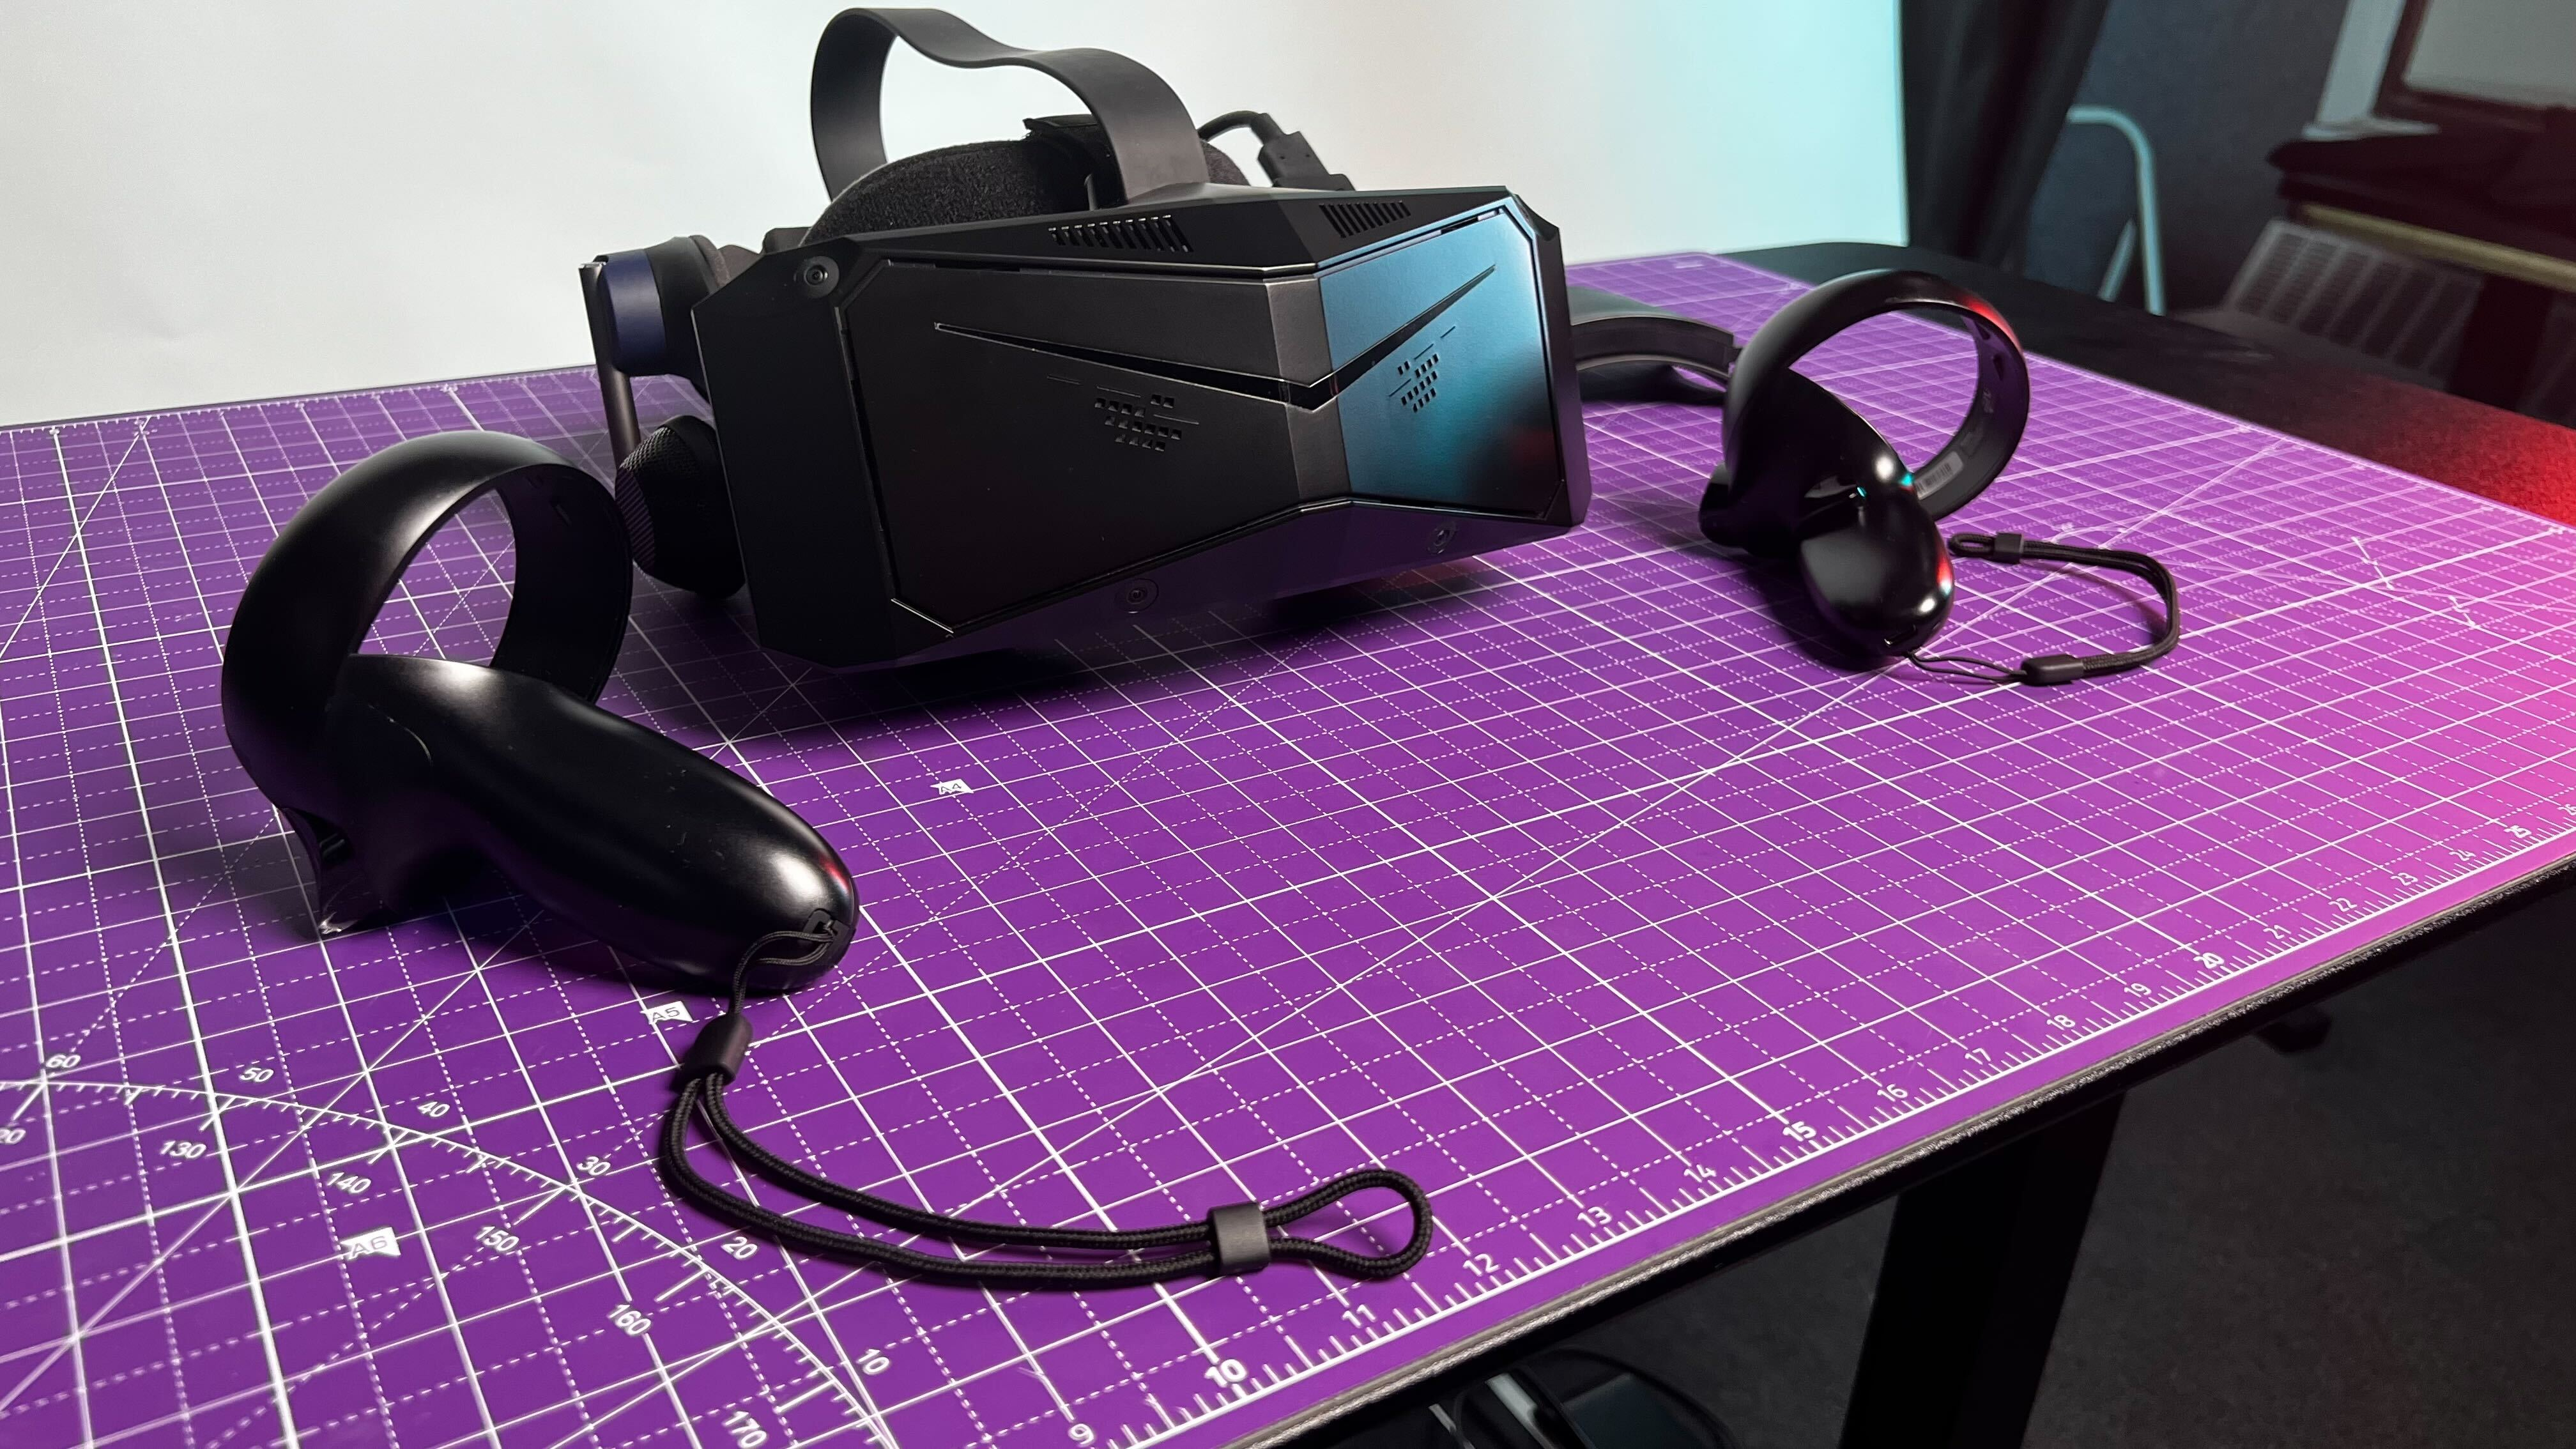 VR headset on a table.